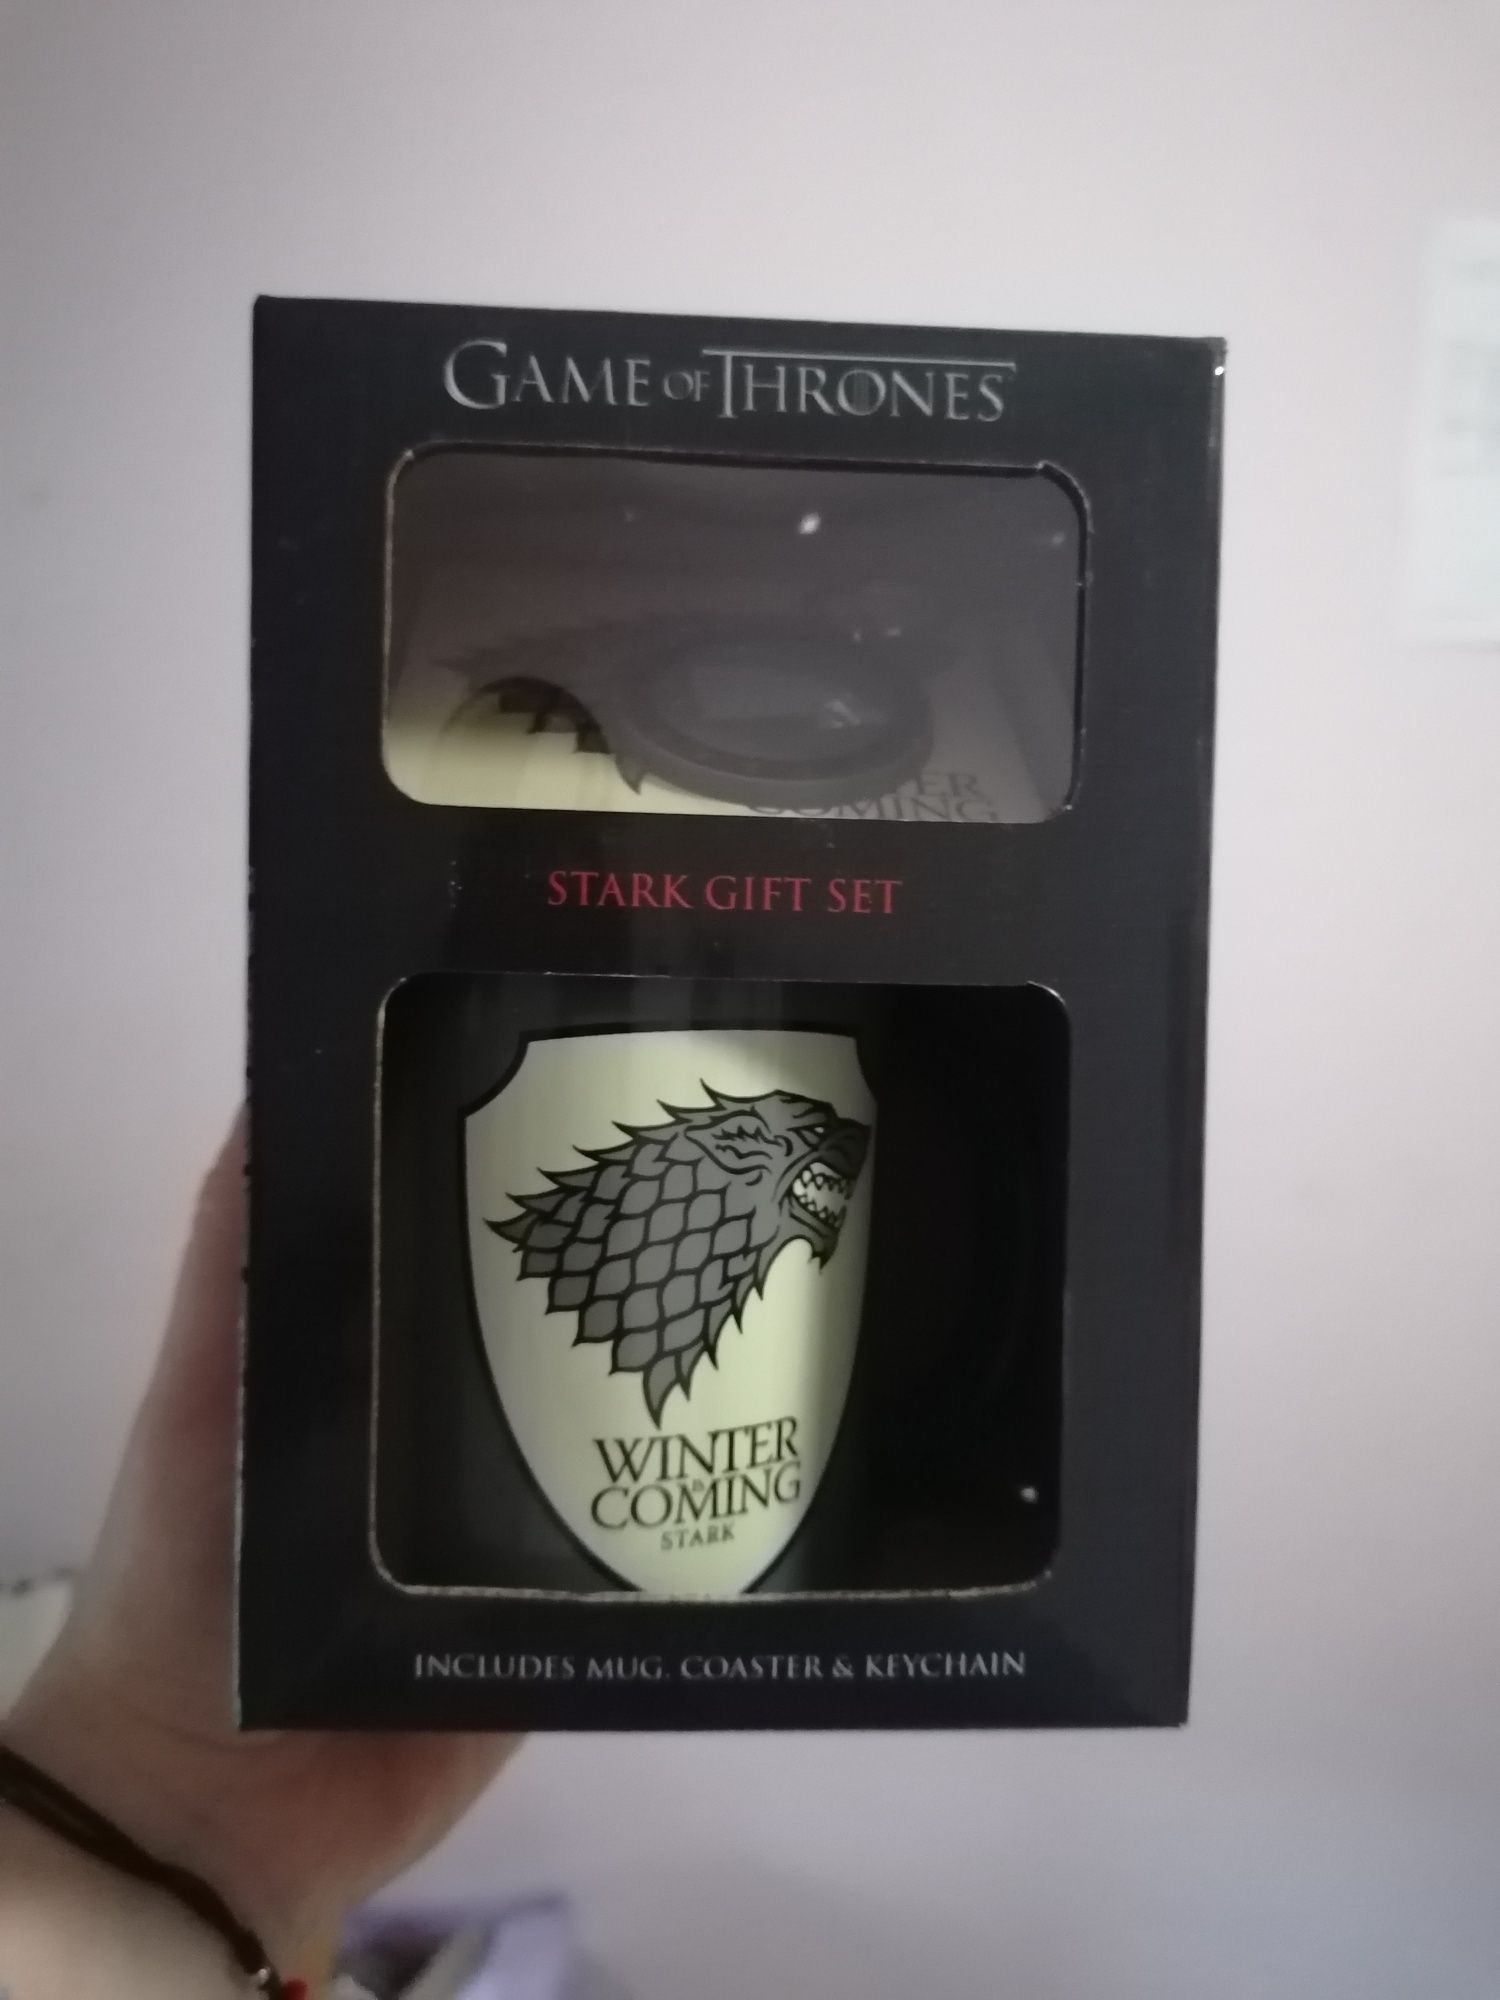 Game of thrones gift set